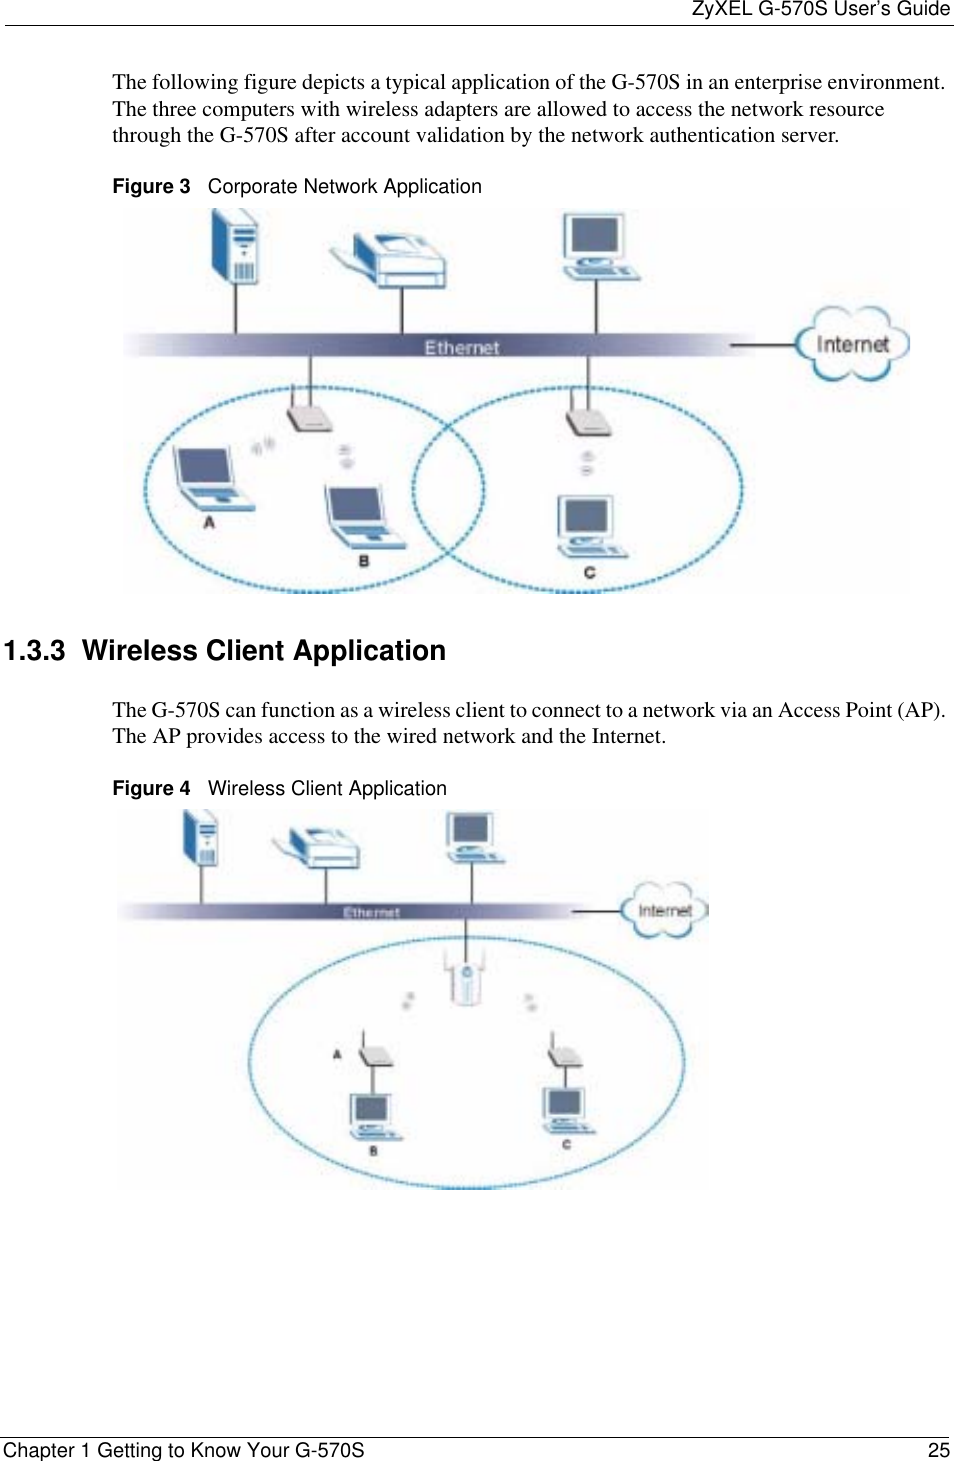 ZyXEL G-570S User’s GuideChapter 1 Getting to Know Your G-570S 25The following figure depicts a typical application of the G-570S in an enterprise environment. The three computers with wireless adapters are allowed to access the network resource through the G-570S after account validation by the network authentication server.Figure 3   Corporate Network Application1.3.3  Wireless Client ApplicationThe G-570S can function as a wireless client to connect to a network via an Access Point (AP). The AP provides access to the wired network and the Internet. Figure 4   Wireless Client Application 